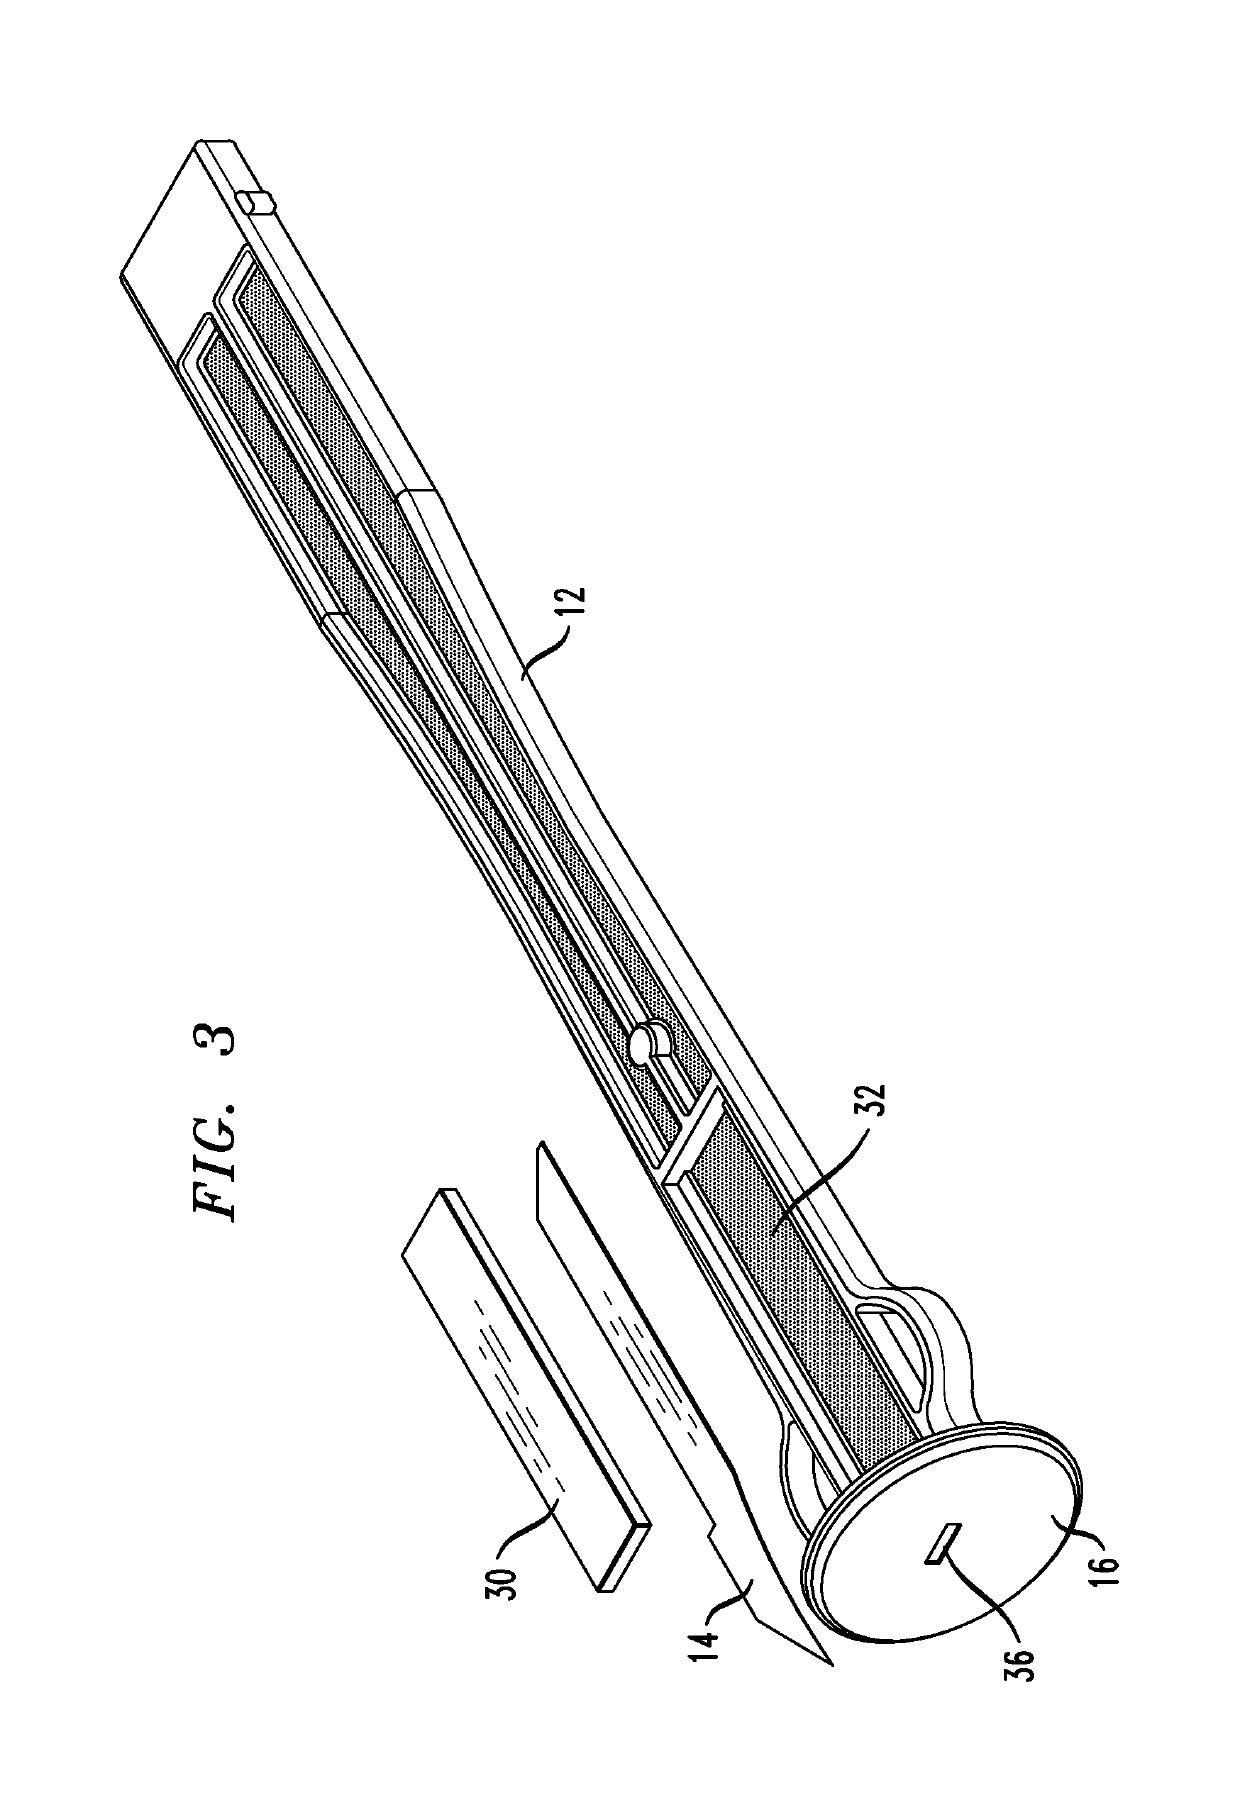 Device for obtaining small, precise volumes of fluid from animals